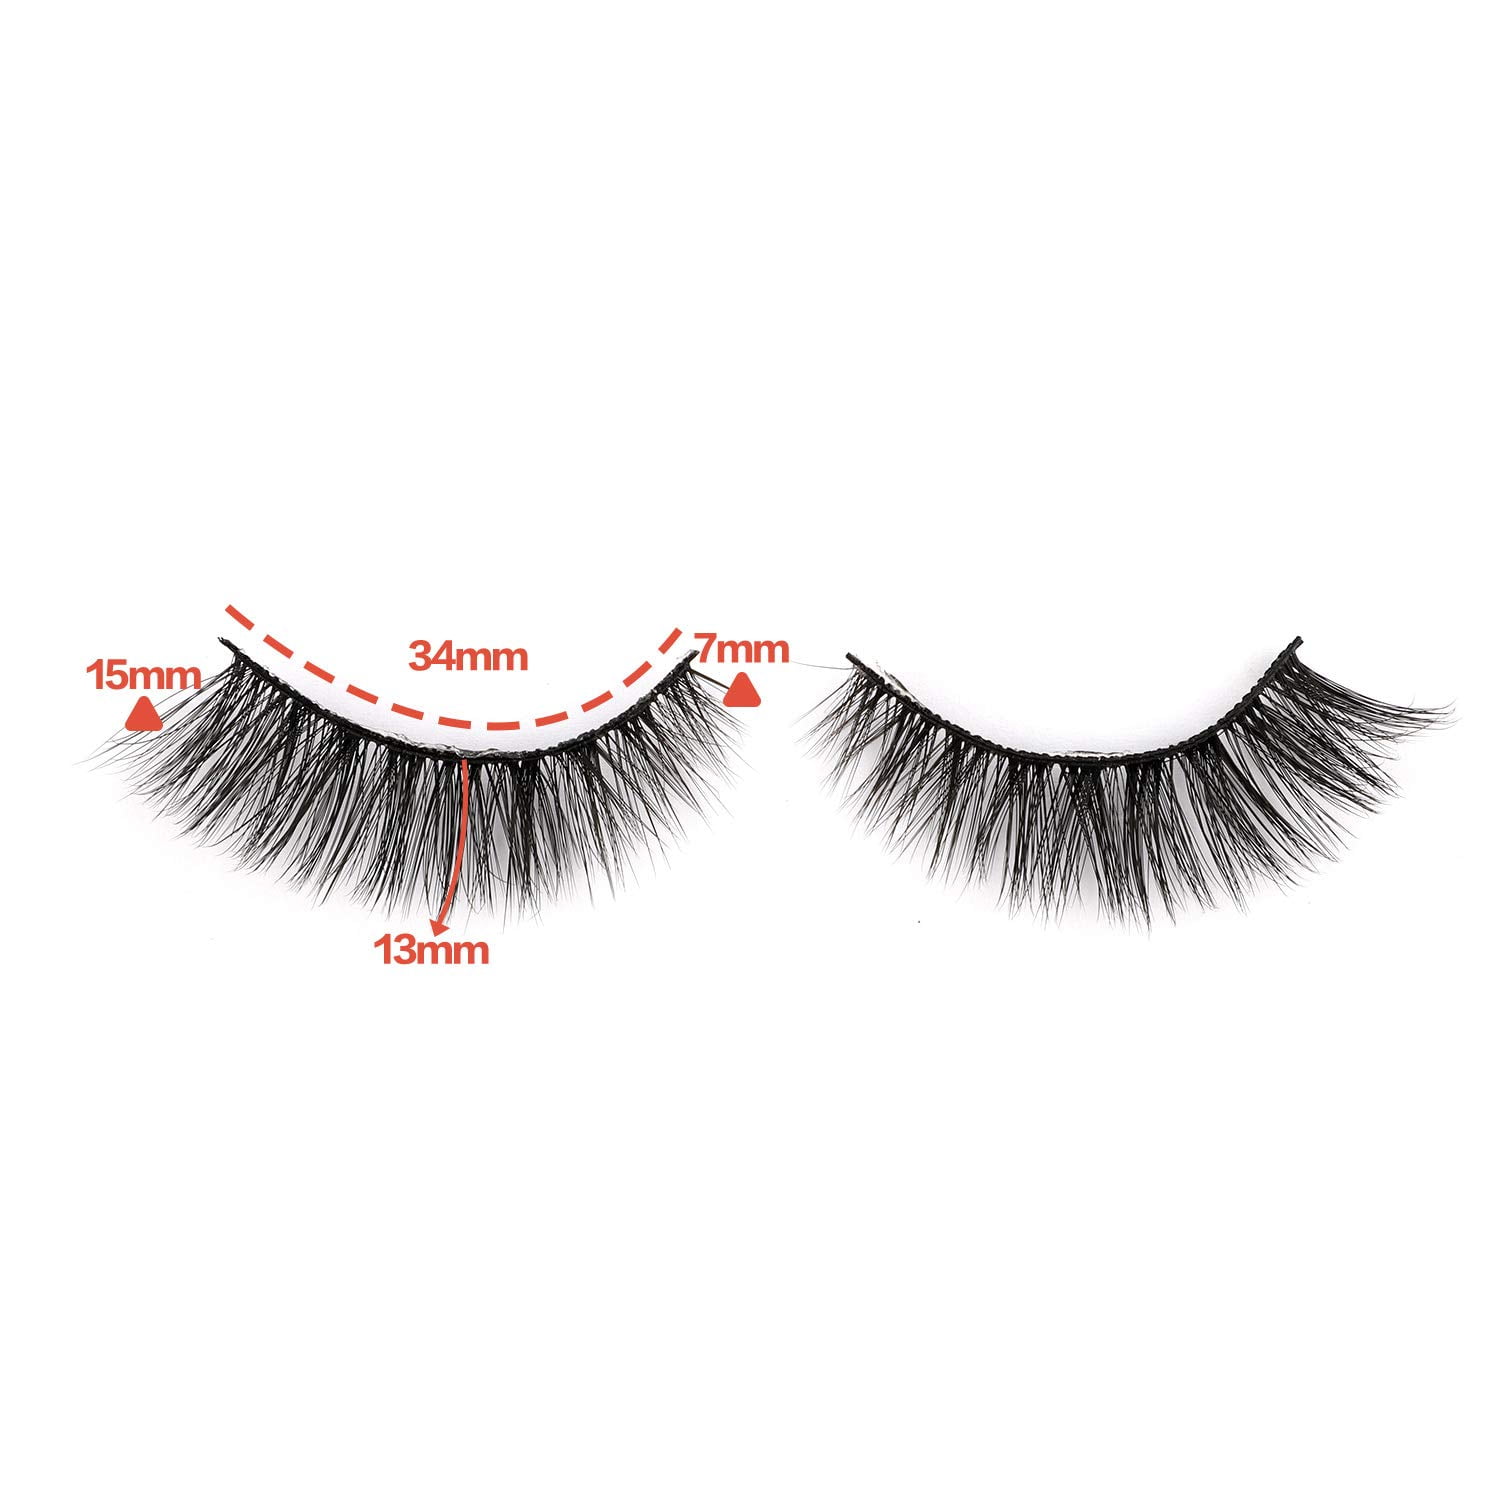 20 Pairs False Eyelashes 3D Faux Mink Lashes Natural Look Wispy 16-20MM  Fluffy Volume Long Thick Lashes Pack 5 Styles Mixed - Walmart.com